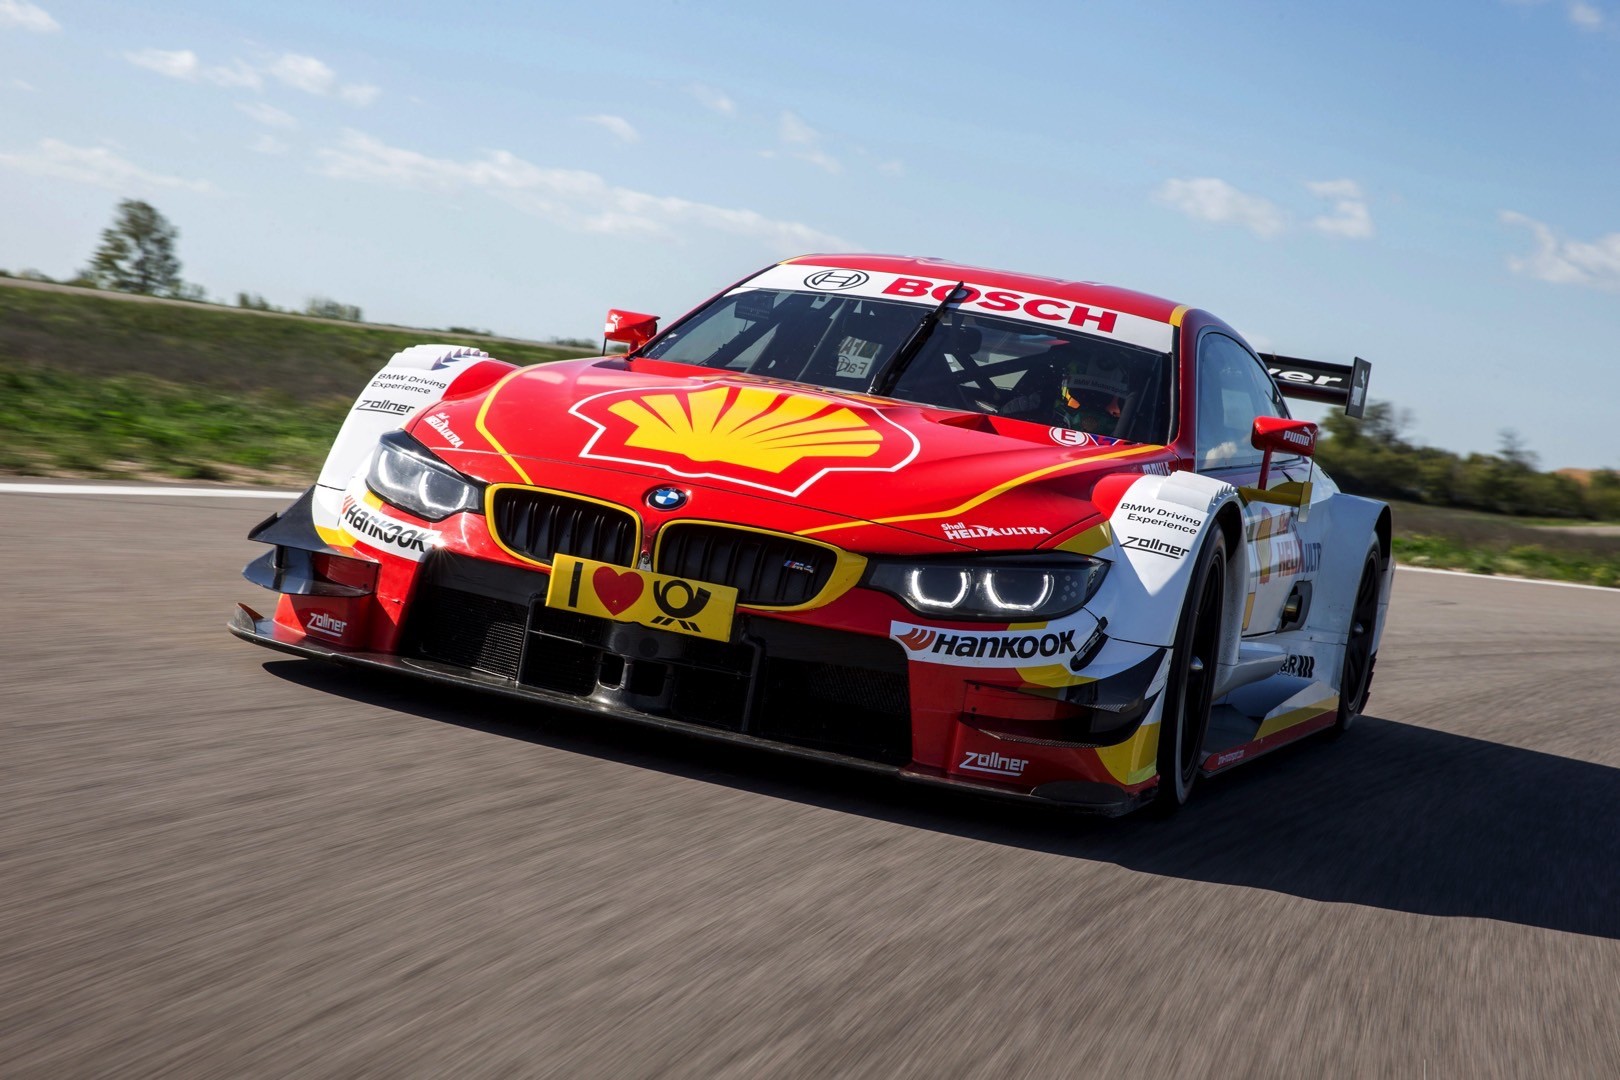 shell-will-have-its-own-bmw-m4-dtm-car-t